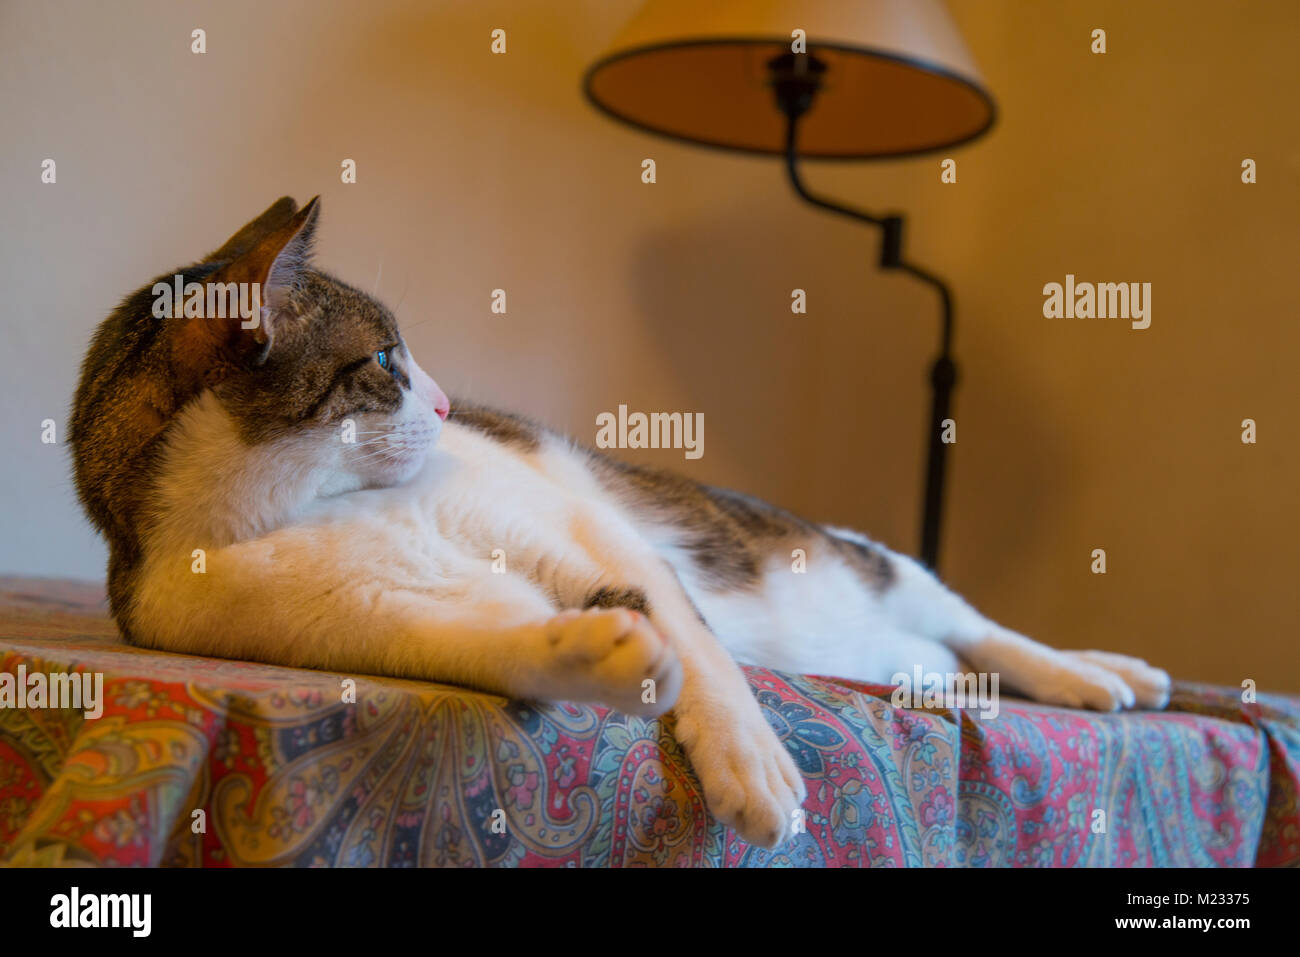 Tabby and white cat lying. Stock Photo